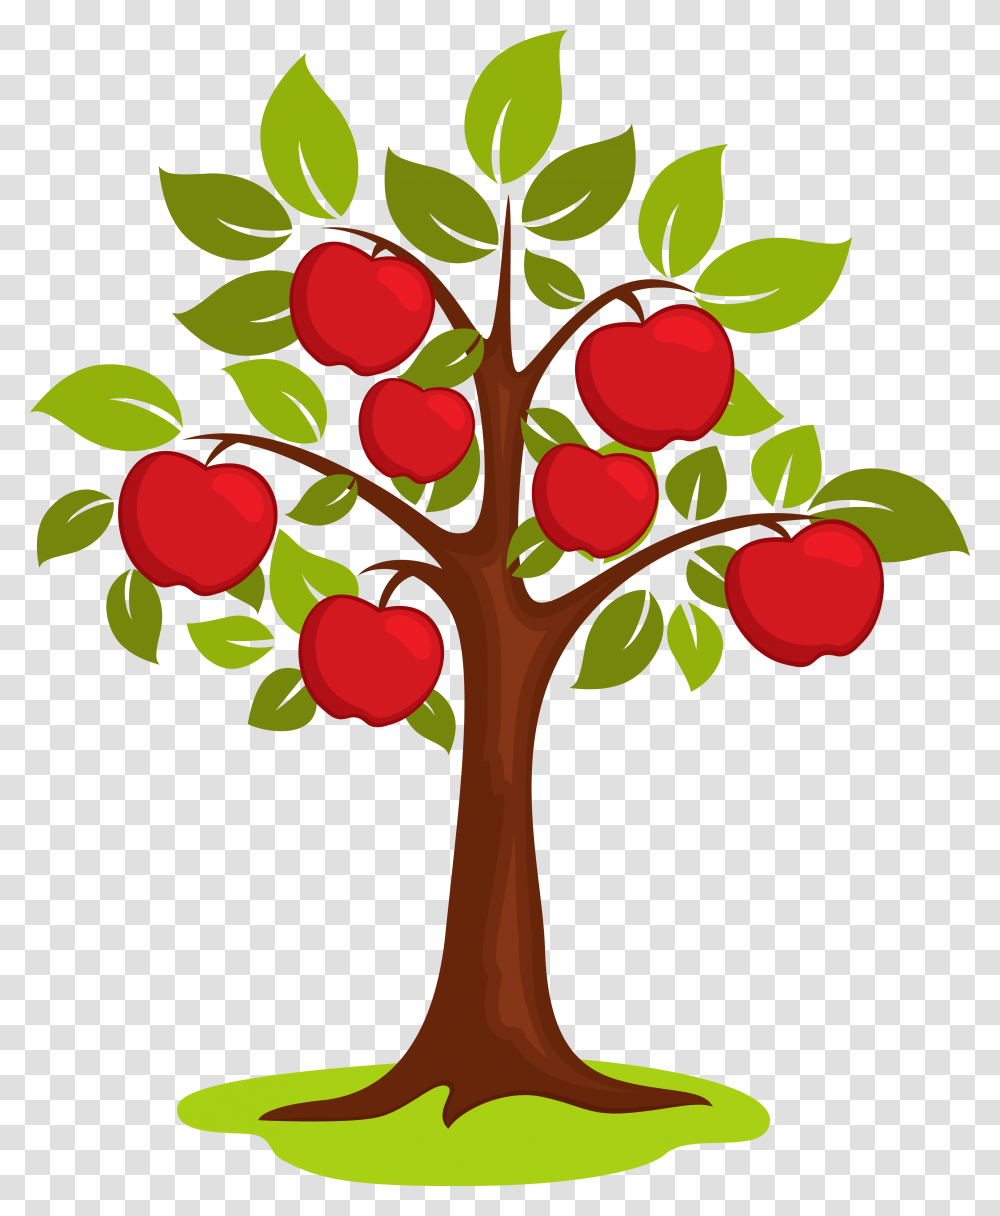 Apple Tree Clipart Banner Library Cartoon Clip Apple Tree Clipart Background, Plant, Fruit, Food, Plum Transparent Png